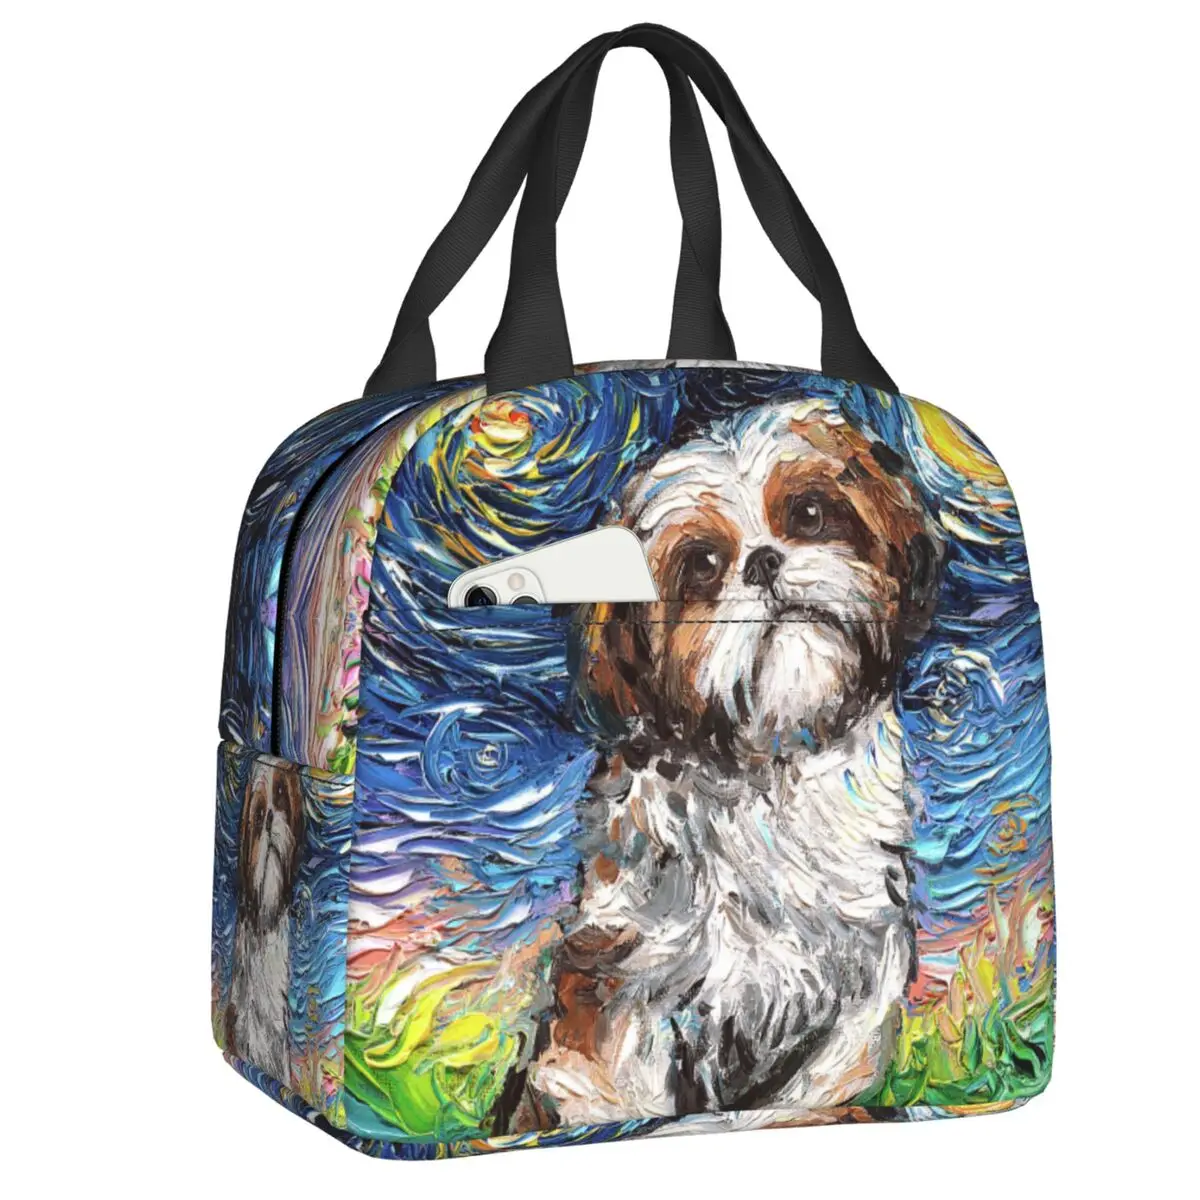 

Shih Tzu Starry Night Insulated Lunch Bags for Women Leakproof Pet Dog Warm Cooler Thermal Lunch Tote Kids School Children